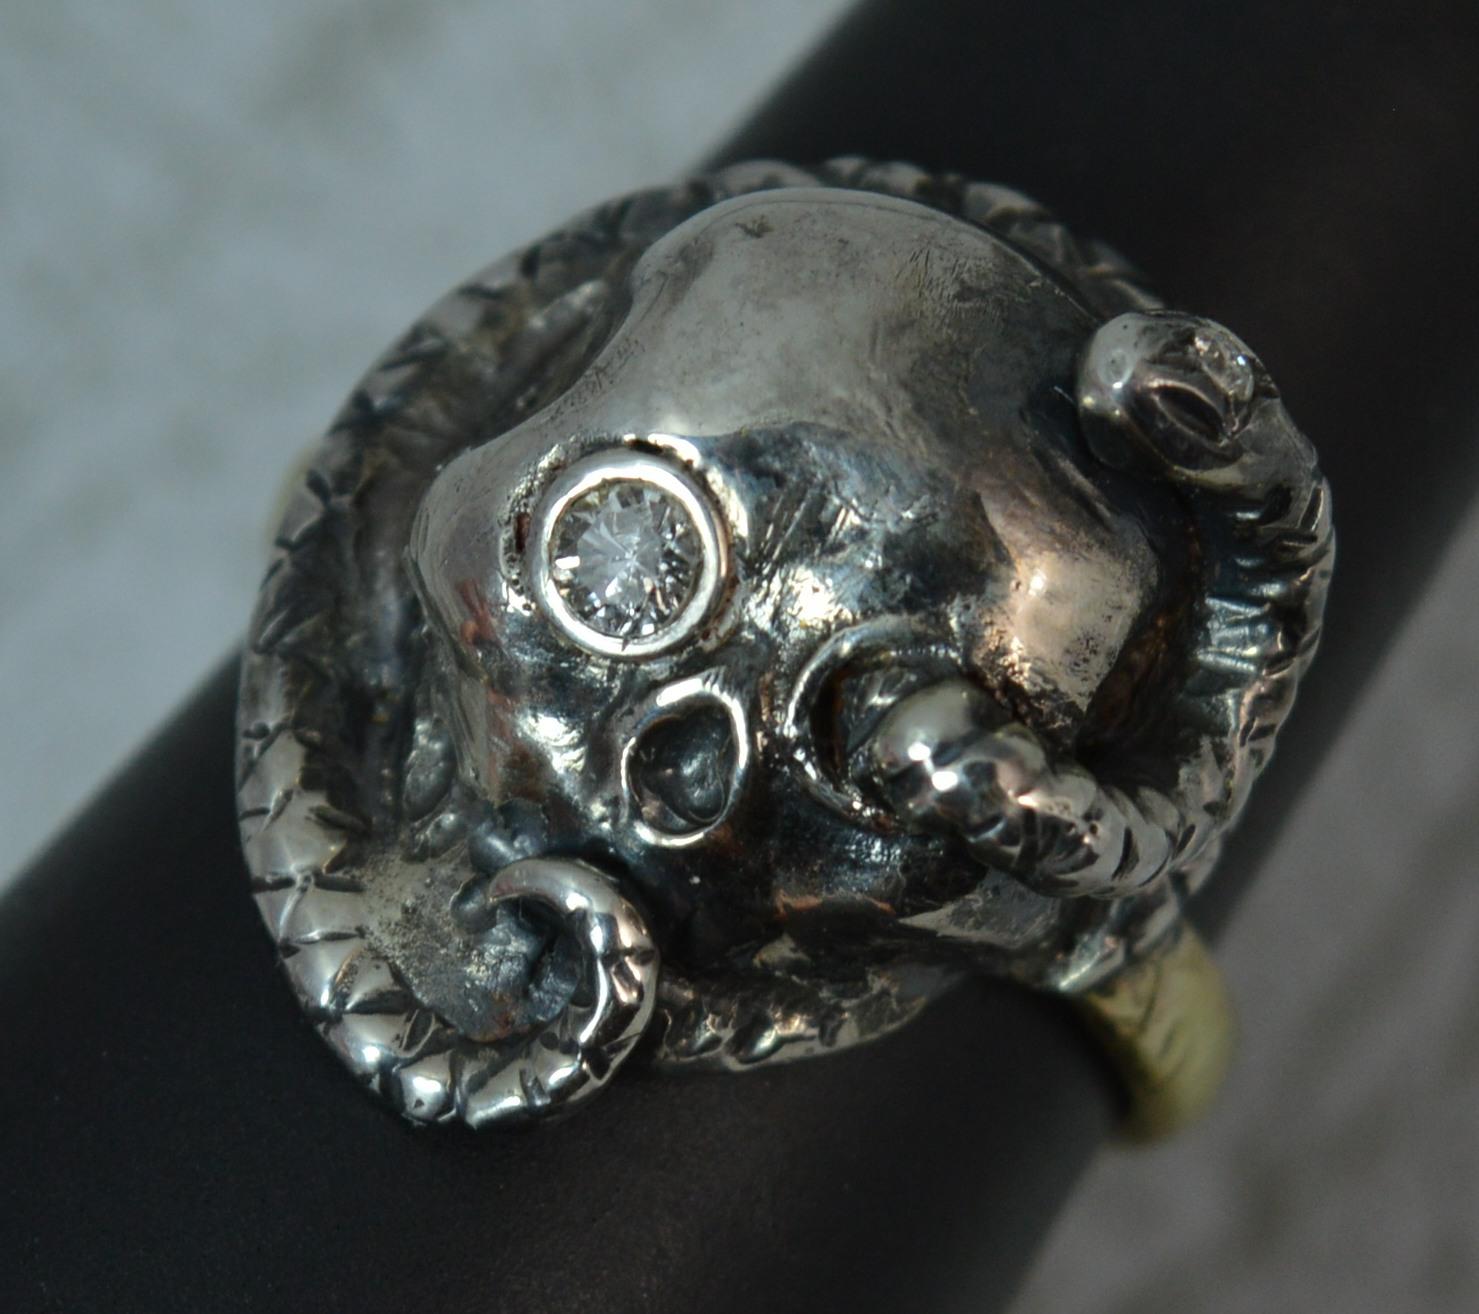 An awesome gothic Skull and Snake design unisex ring.
SIZE ; Q 1/2 UK, 7 1/2 US
Modelled with a vintage 9 carat gold shank with textured finish.
The head modelled in oxidized silver with a skull to centre and snake coiled around.
17mm x 20mm head.